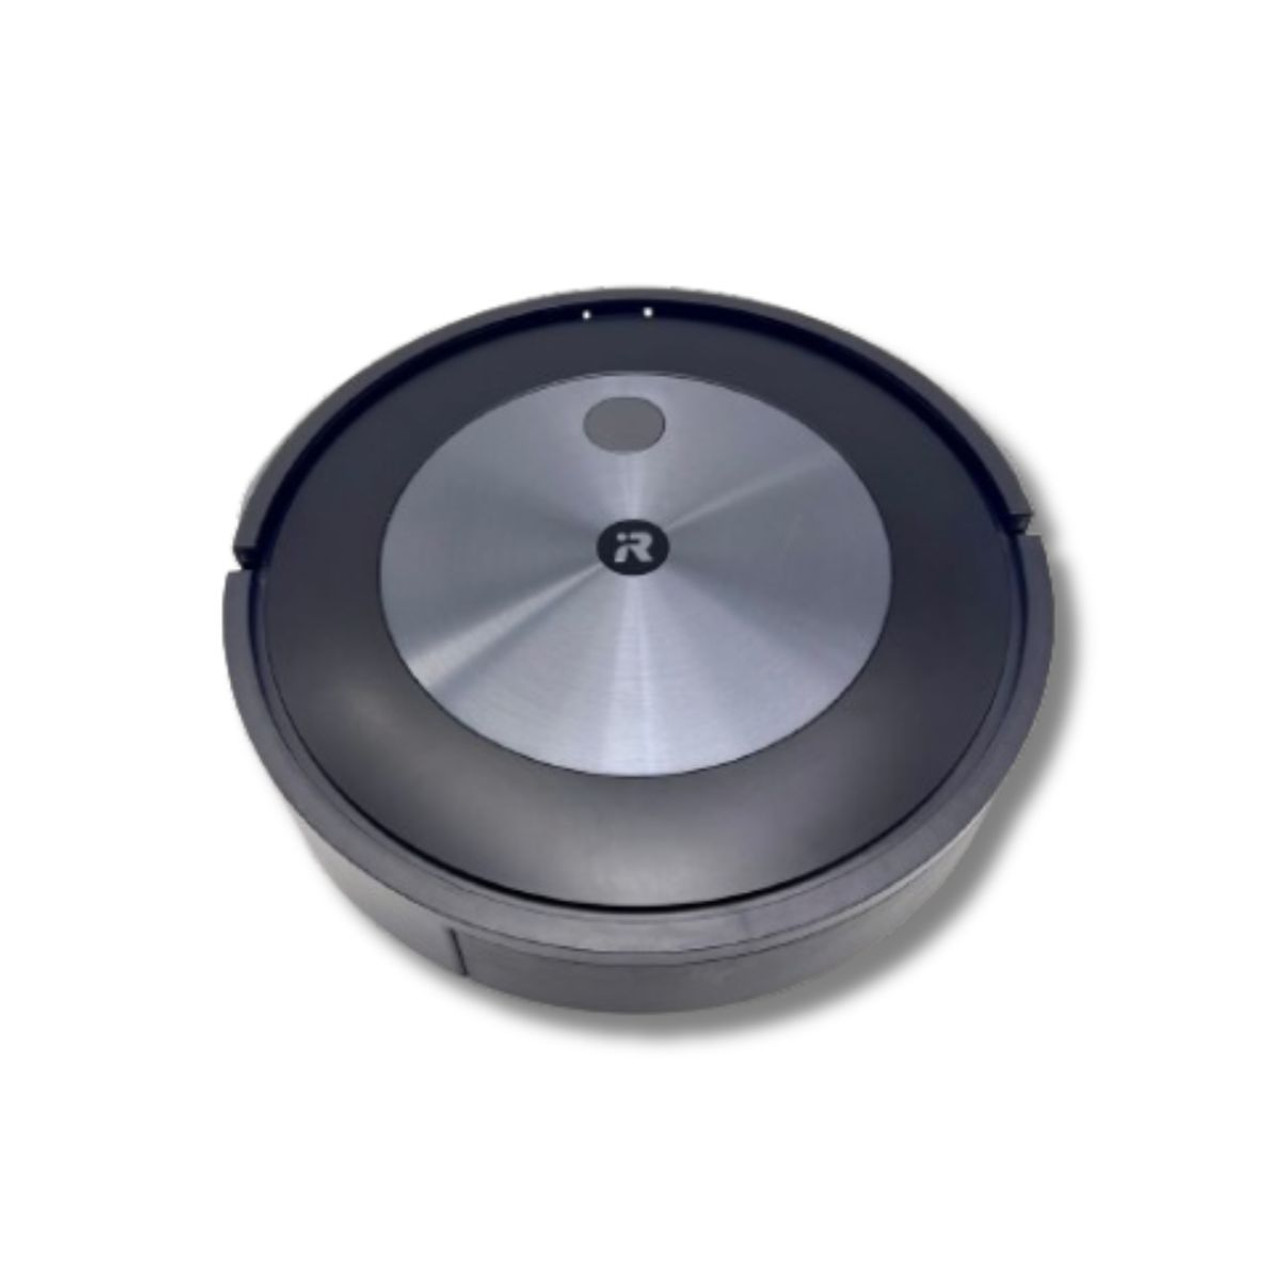 IRobot Roomba J715020 Robot Vacuum with Smart Mapping - Graphite product image